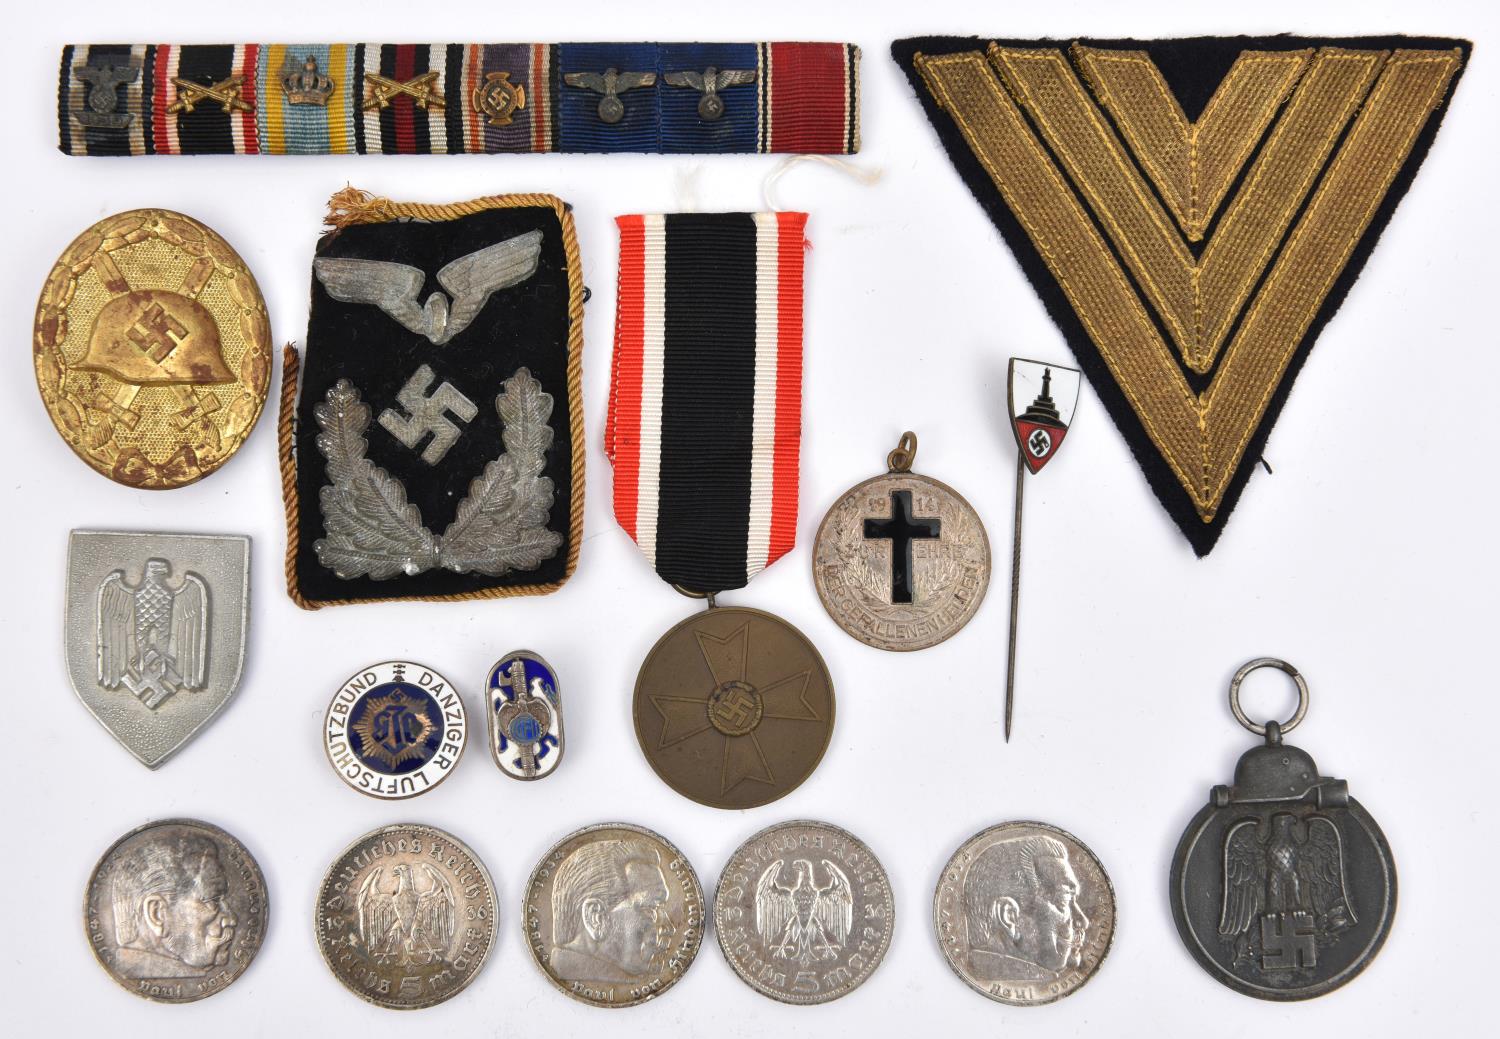 Third Reich medals and insignia: Eastern front medal (no ribbon); War Merit medal with ribbon;